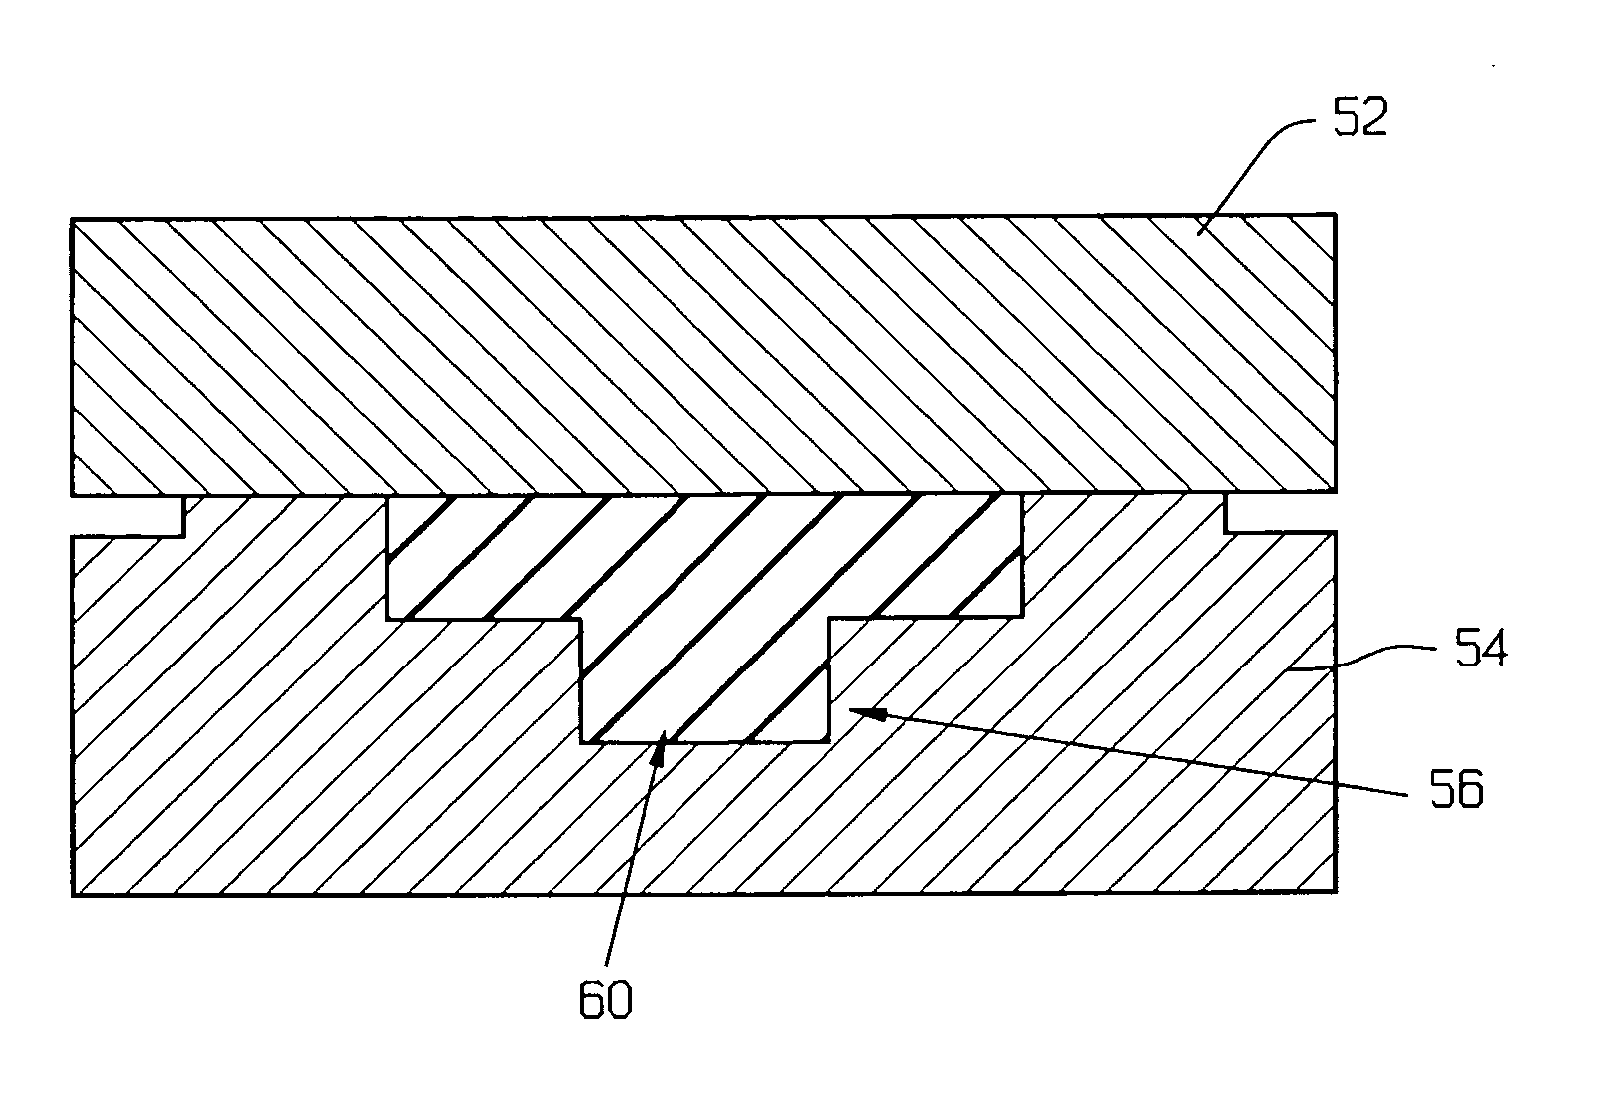 Diaphragm article with fiber reinforcement and method of manufacturing same